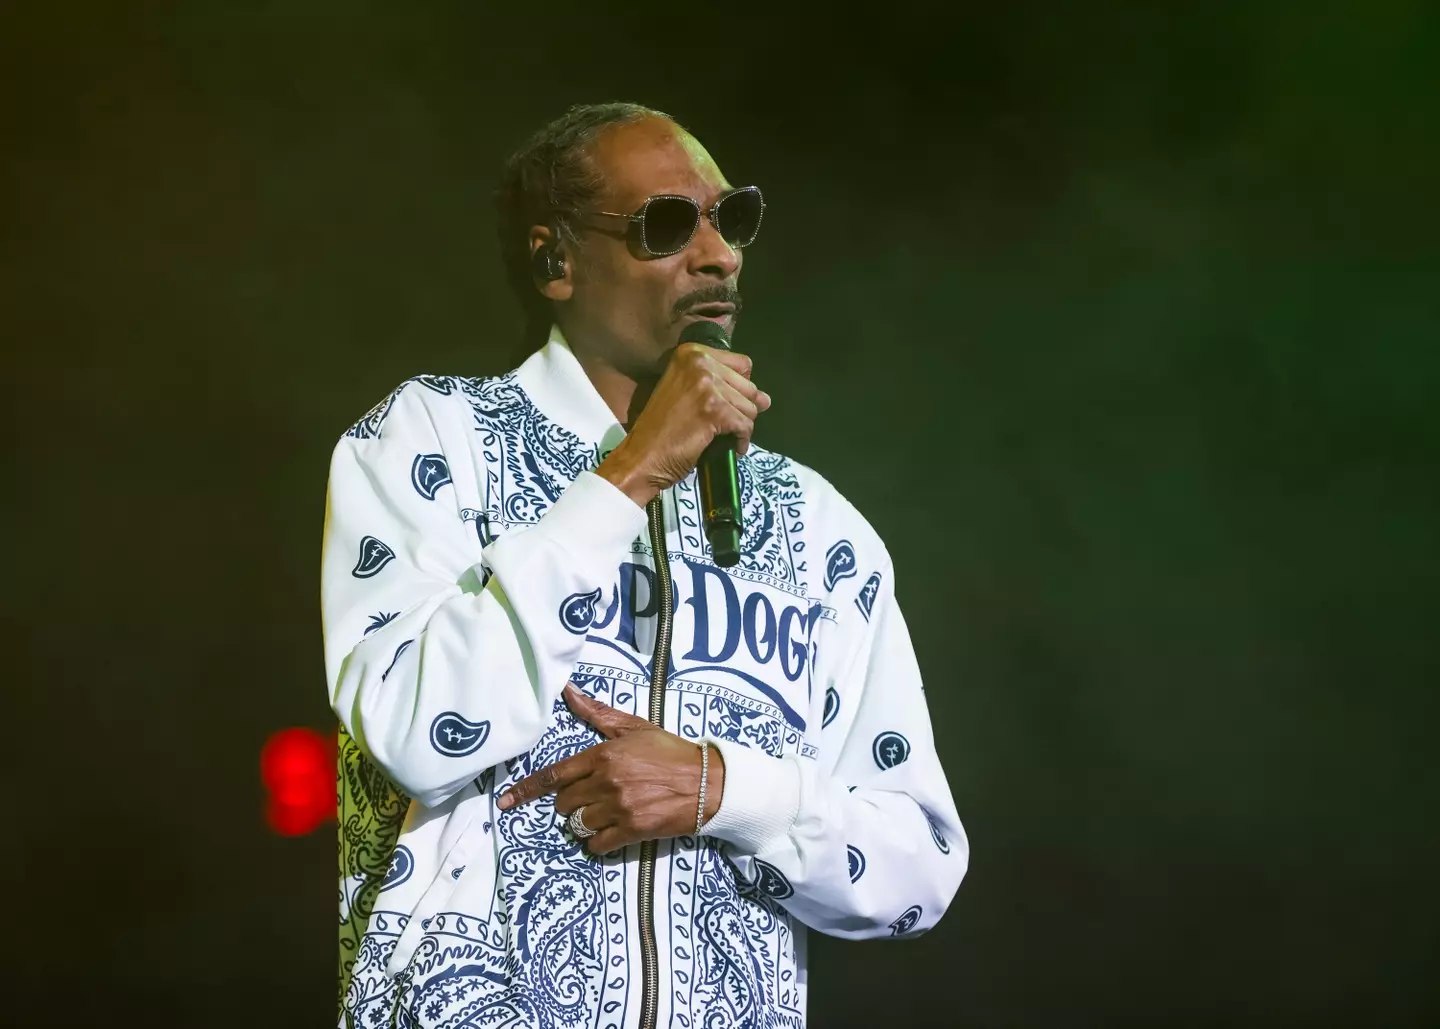 Snoop Dogg has returned to Call of Duty.